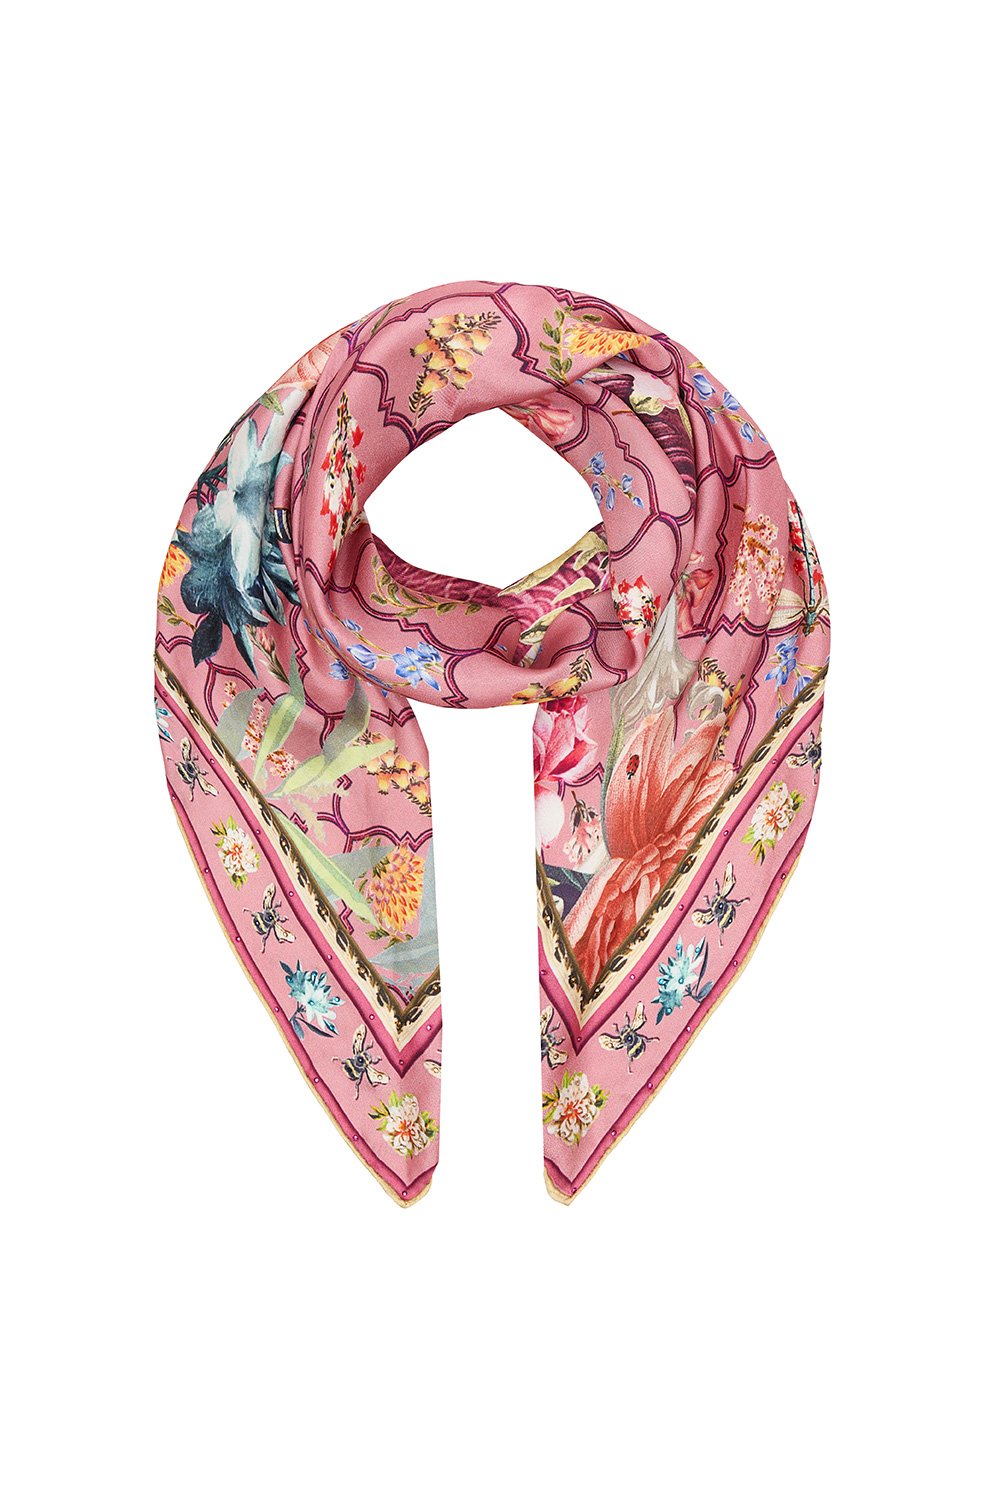 LARGE SQUARE SCARF PATCHWORK HEART